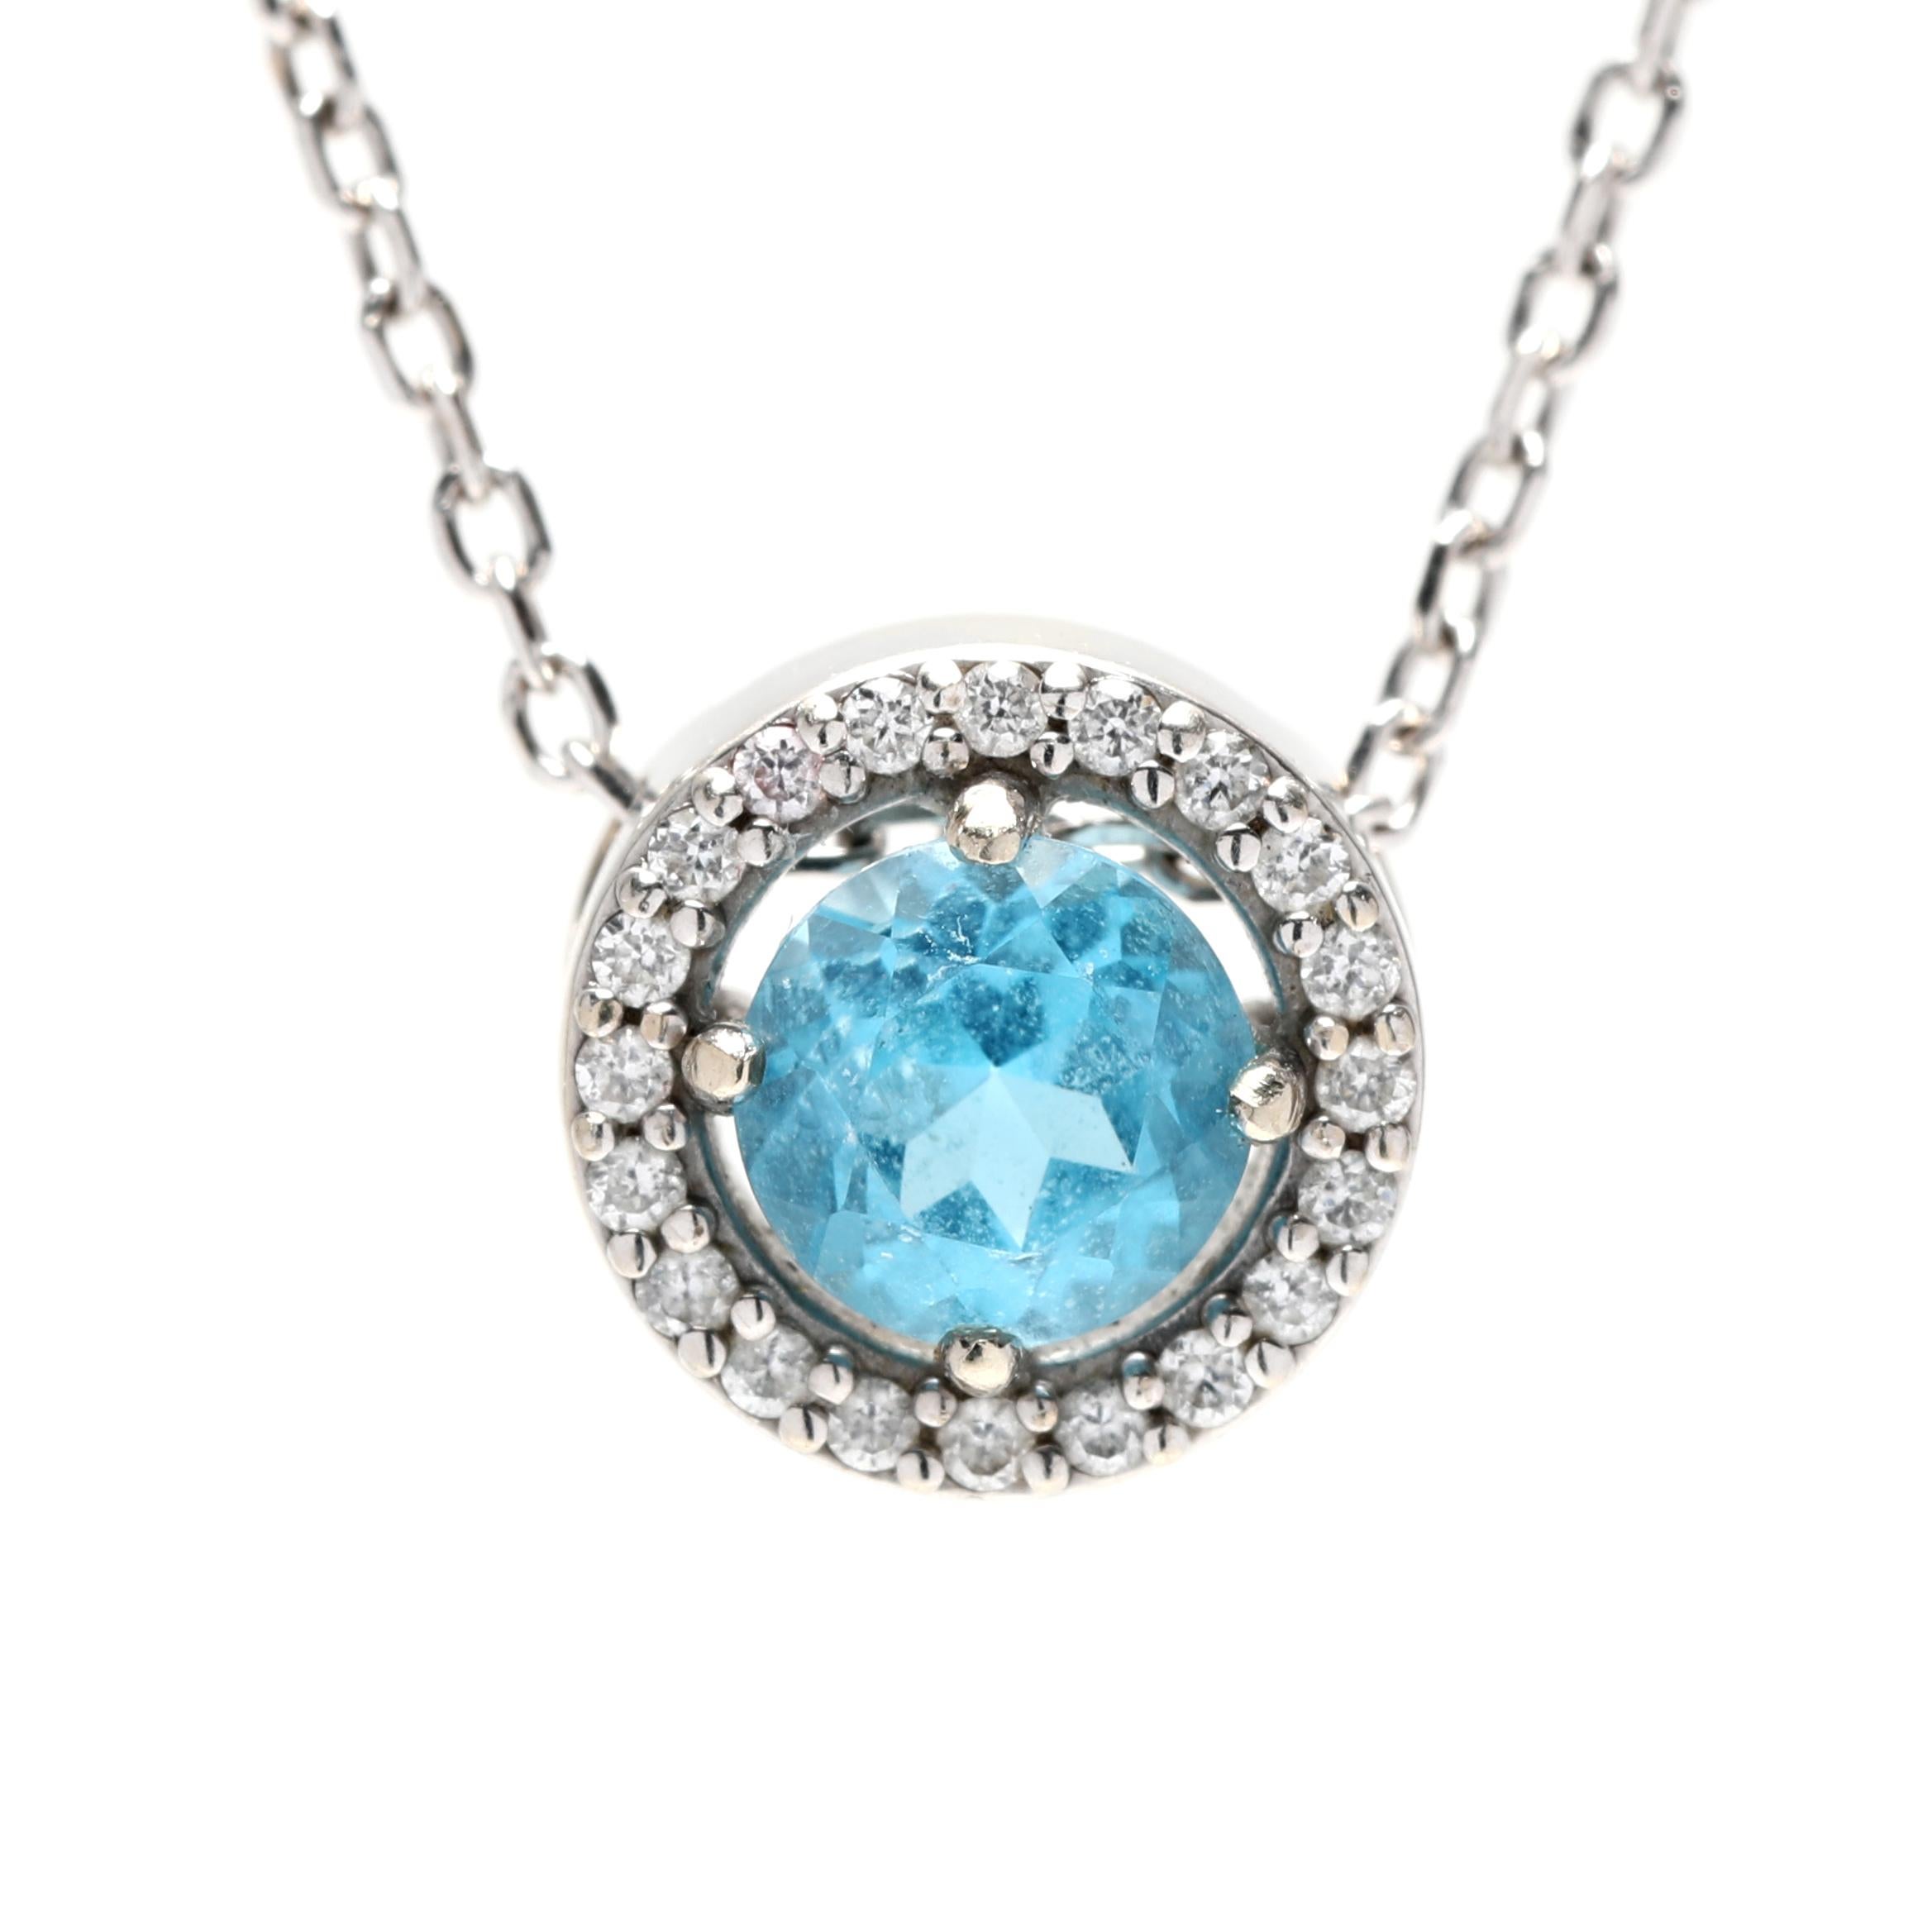 This exquisite pendant necklace features a stunning blue topaz, surrounded by a halo of glistening diamonds. Crafted in 14K white gold, the elegant design is perfect for any occasion and makes a beautiful December birthstone necklace. The pendant